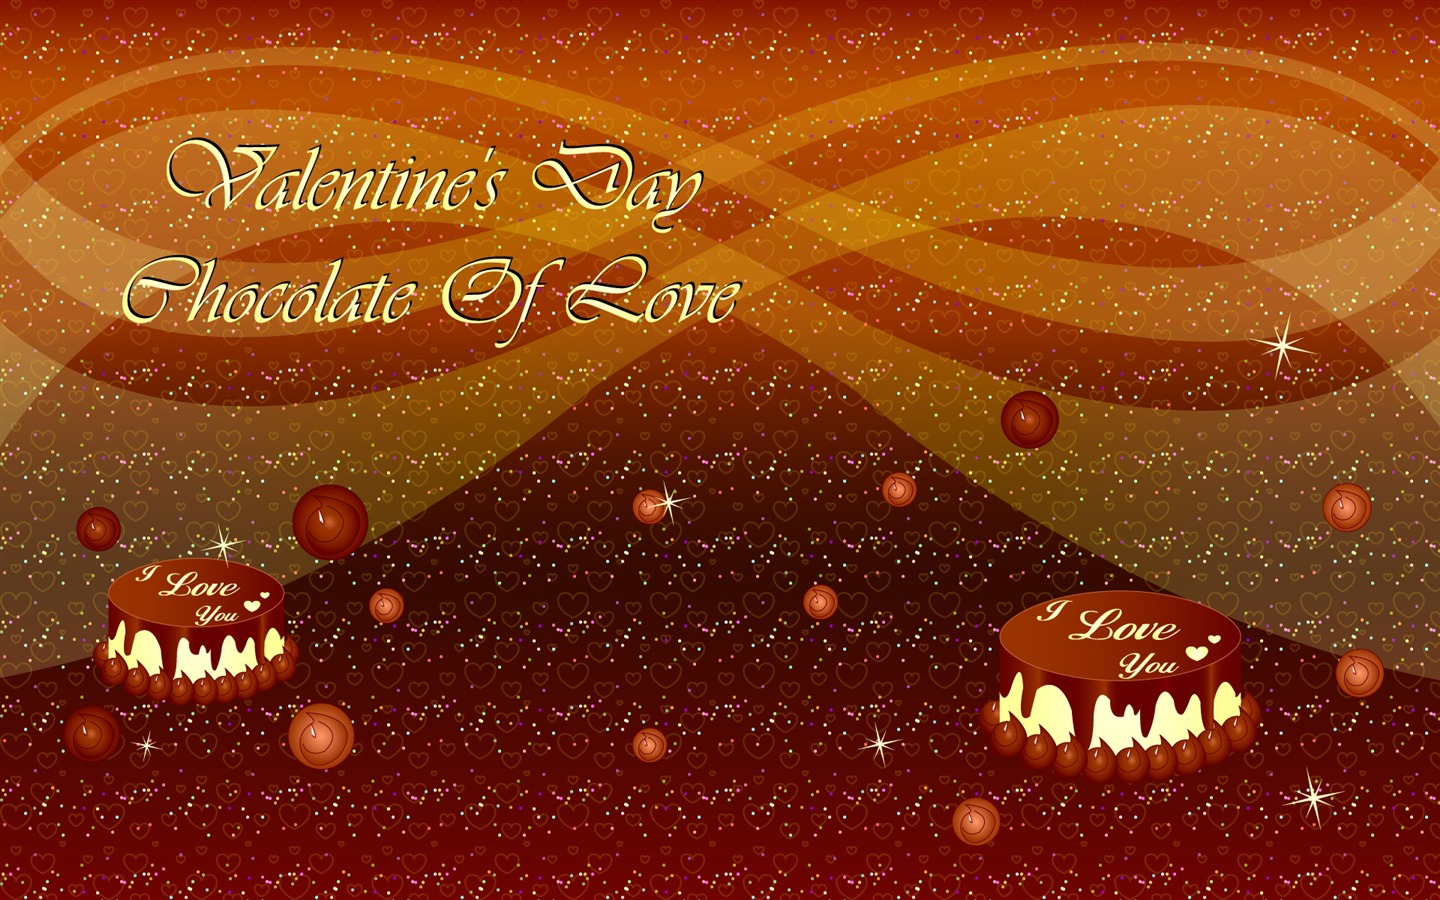 Valentine's Day Theme Wallpapers (2) #4 - 1440x900